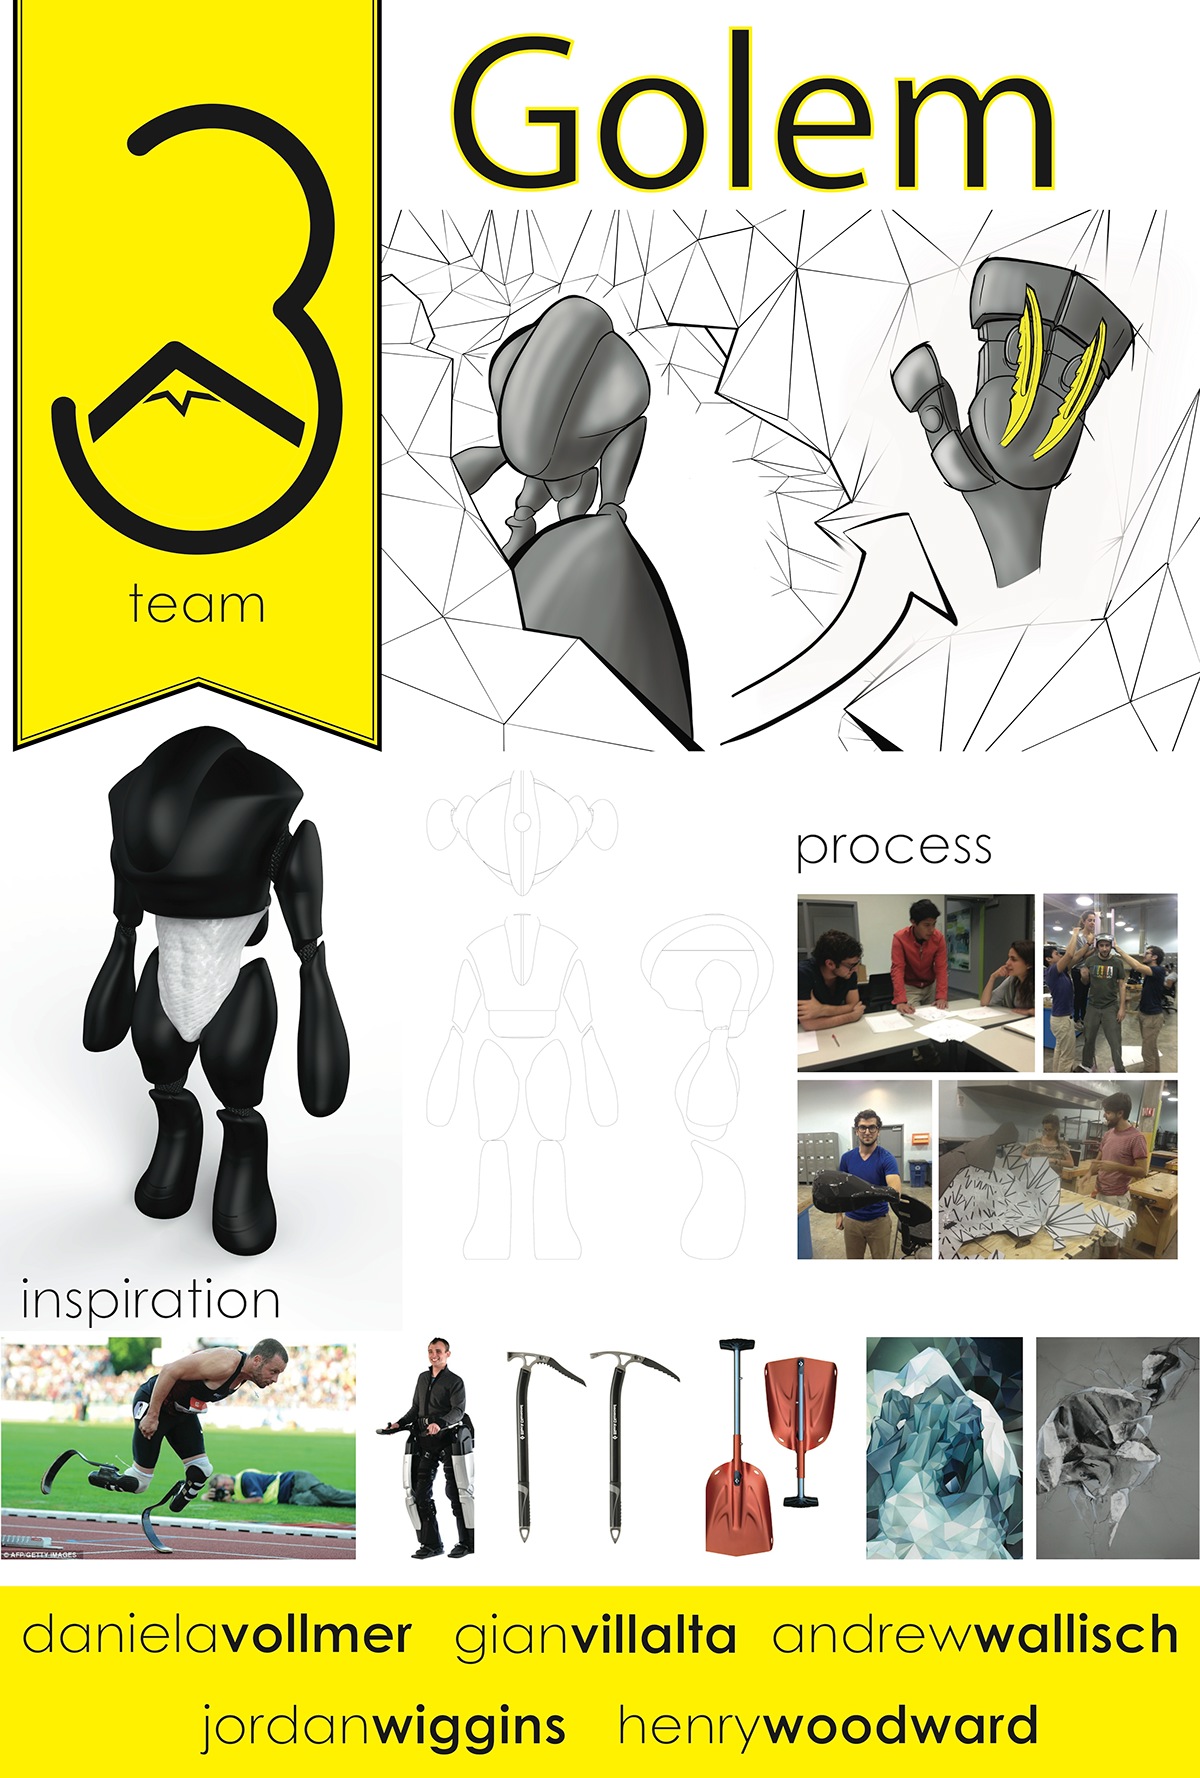 mech suit exoskeleton concept industrial graphic Layout poster team